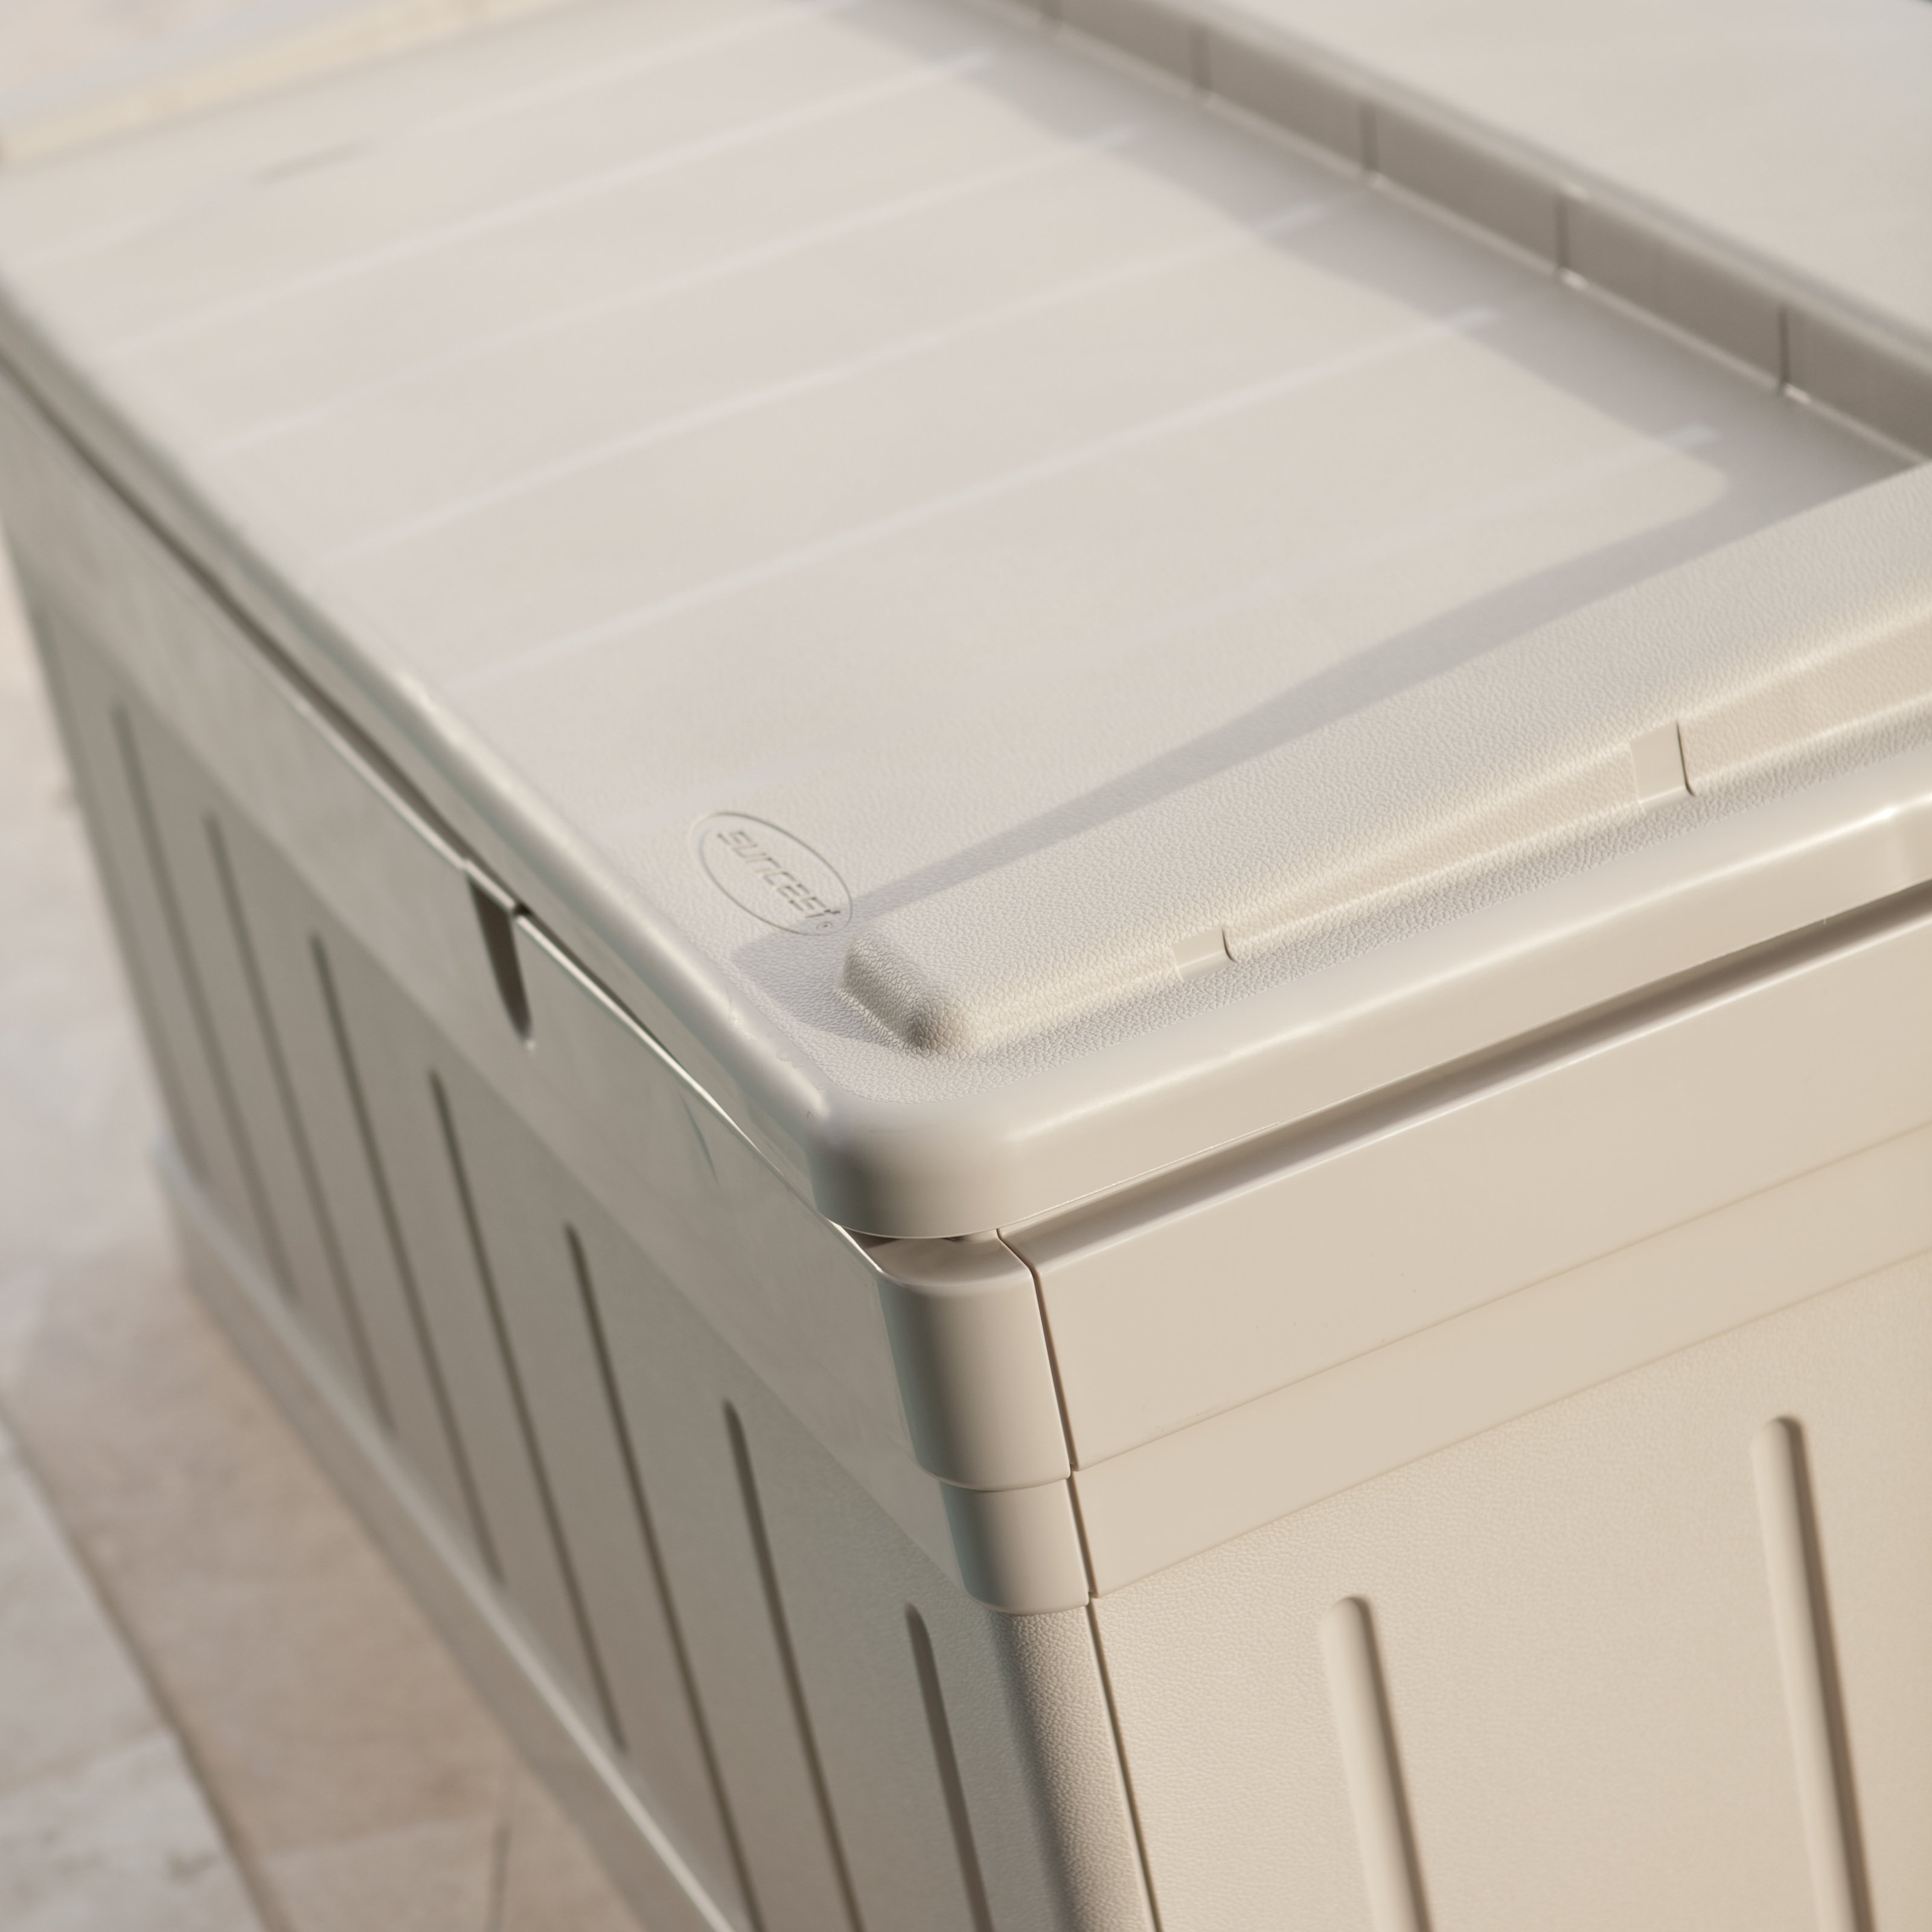 Suncast Horizontal 129 Gallon Stay Dry Outdoor Deck Storage Box Resin with Seat, Taupe, 10.1 in D x 10.1 in H x 10.1 in W, 47 lb - image 5 of 6